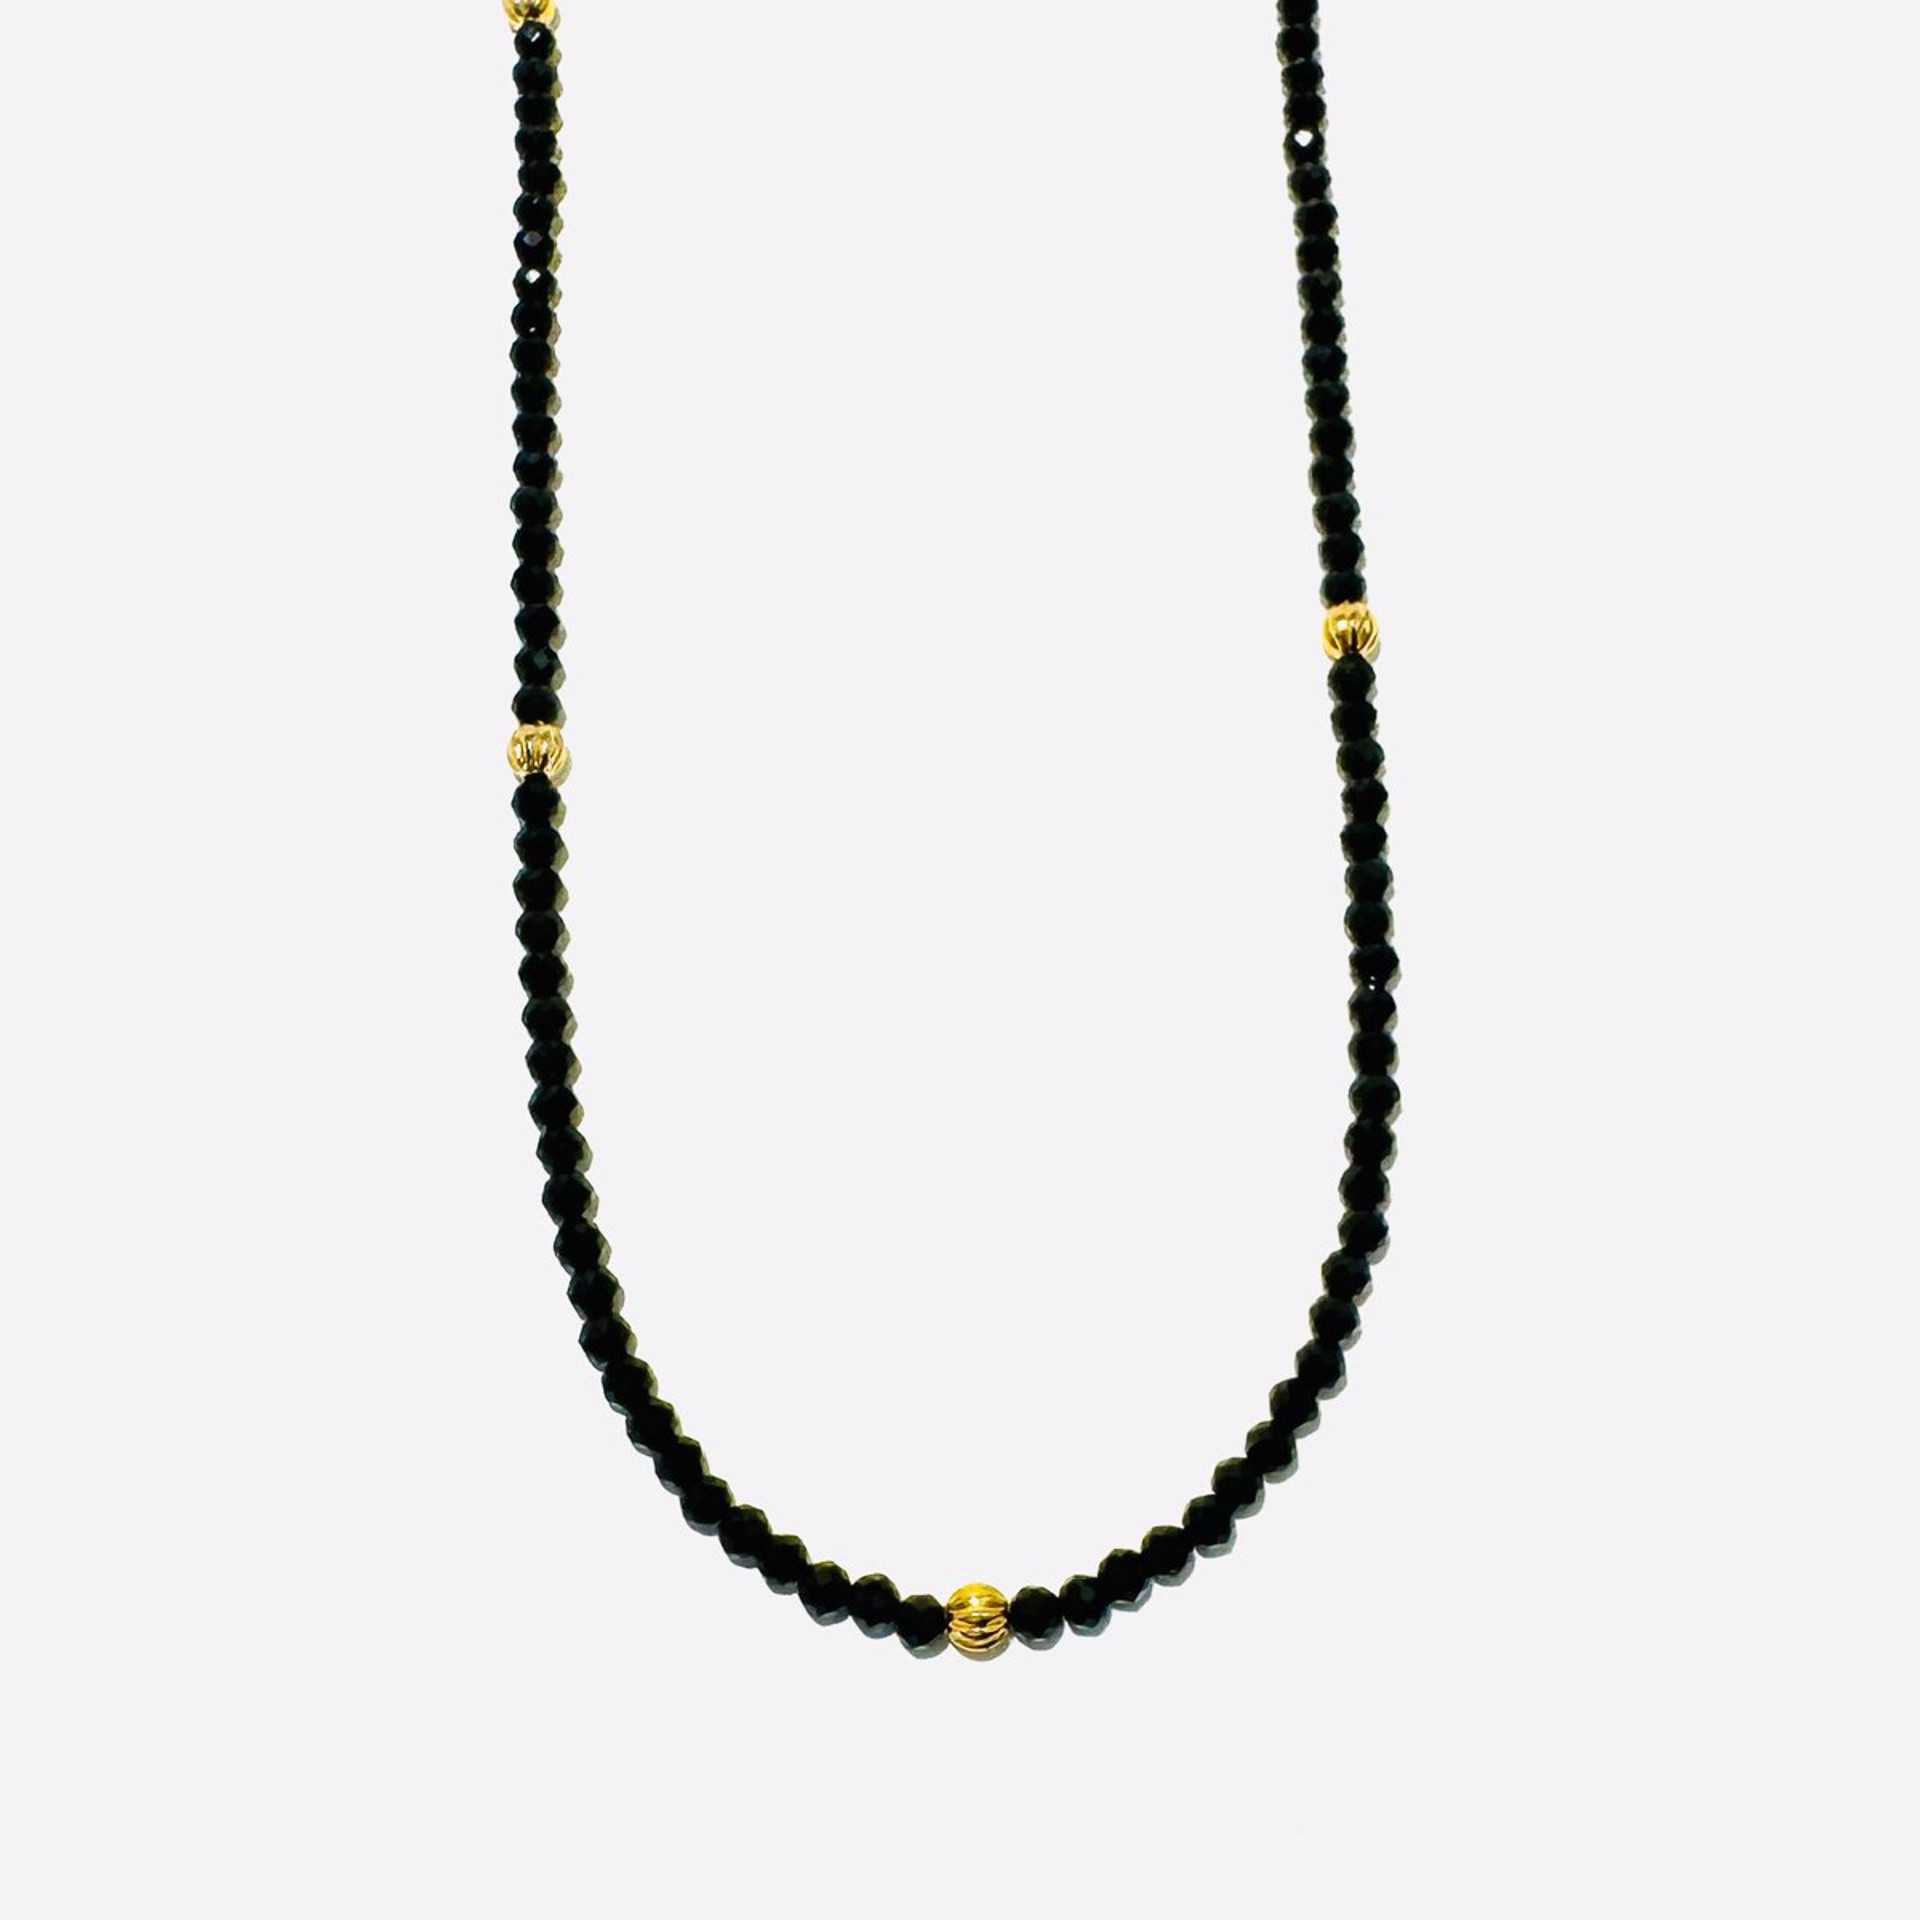 Tiny Black Spinel, GF Bead Accent Necklace NT23-115 by Nance Trueworthy